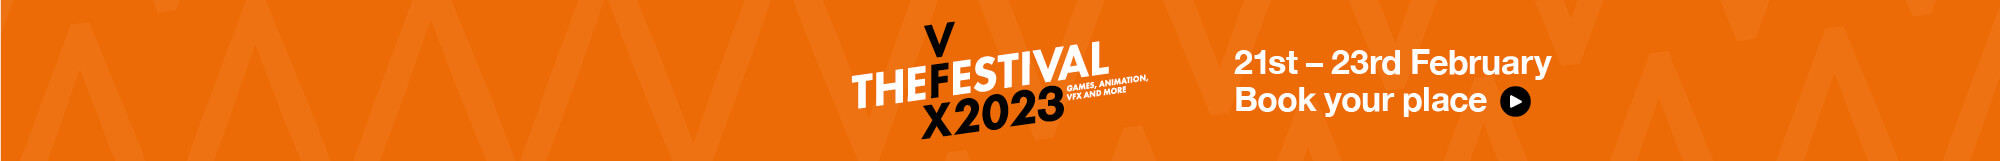 Book your place at the VFX Festival